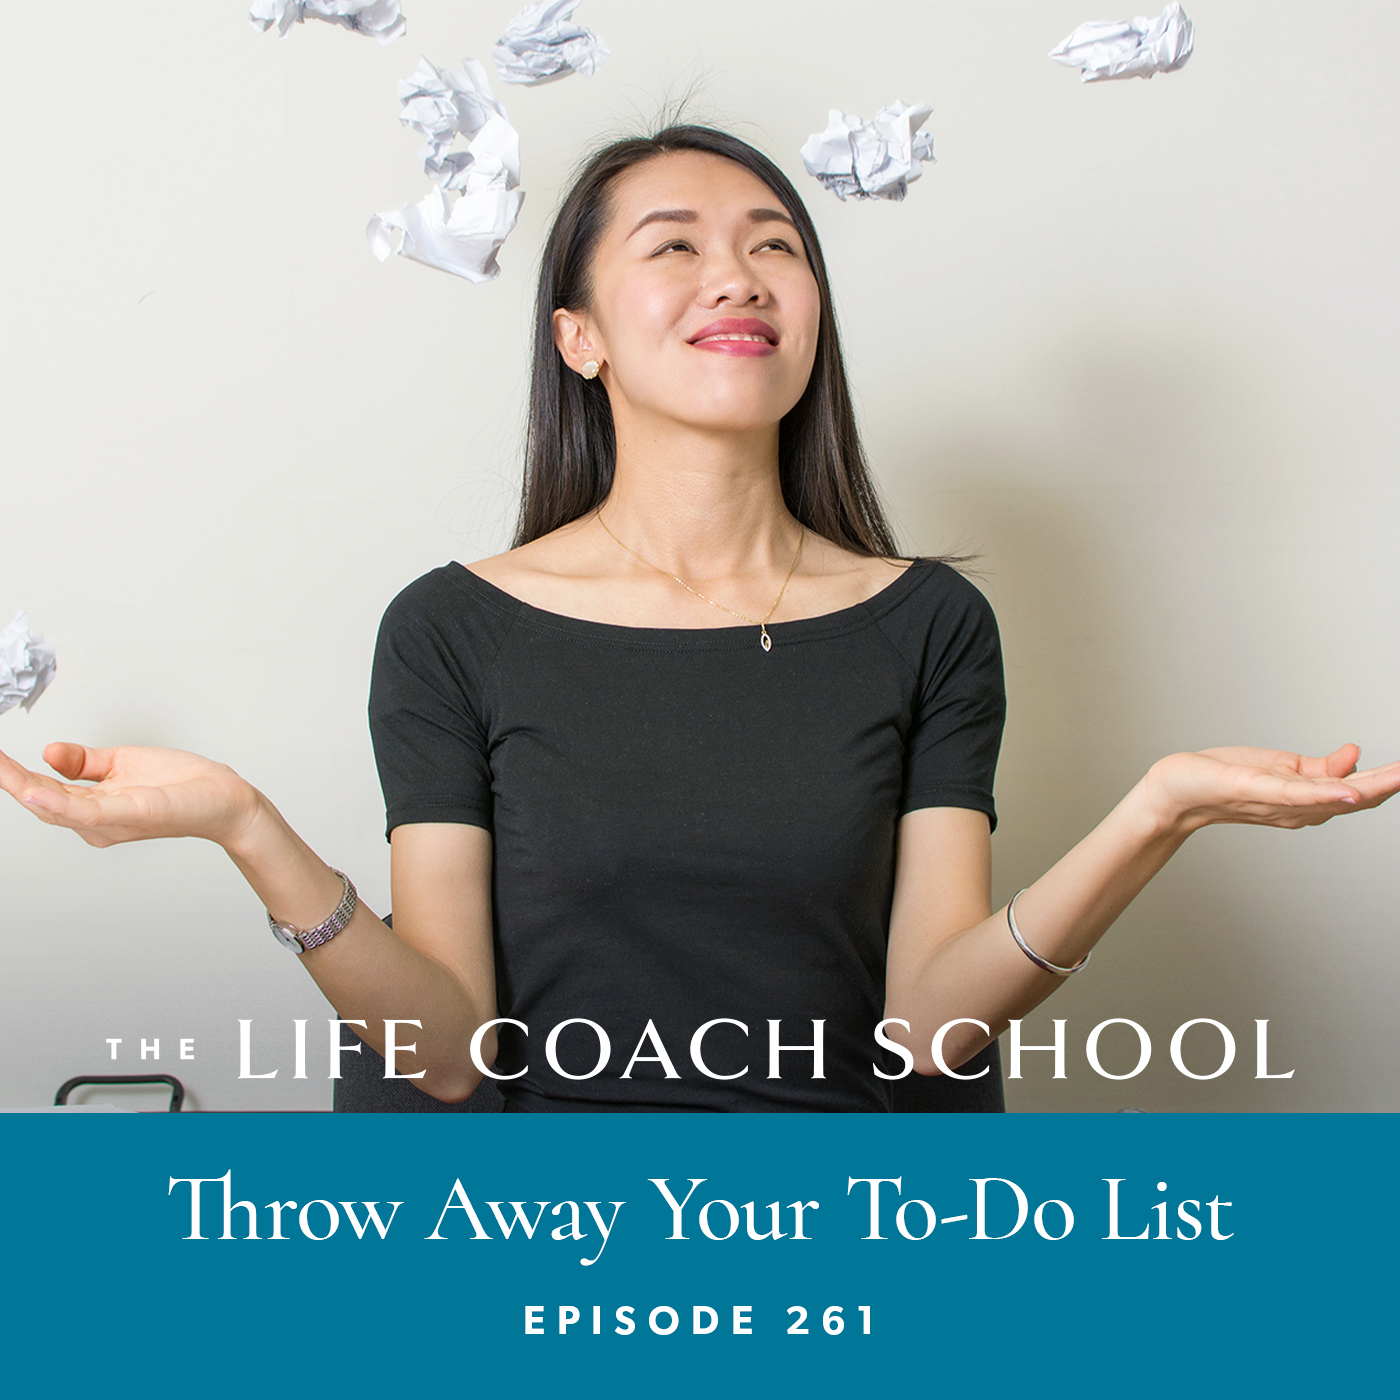 Ep #261: Throw Away Your To-Do List - The Life Coach School